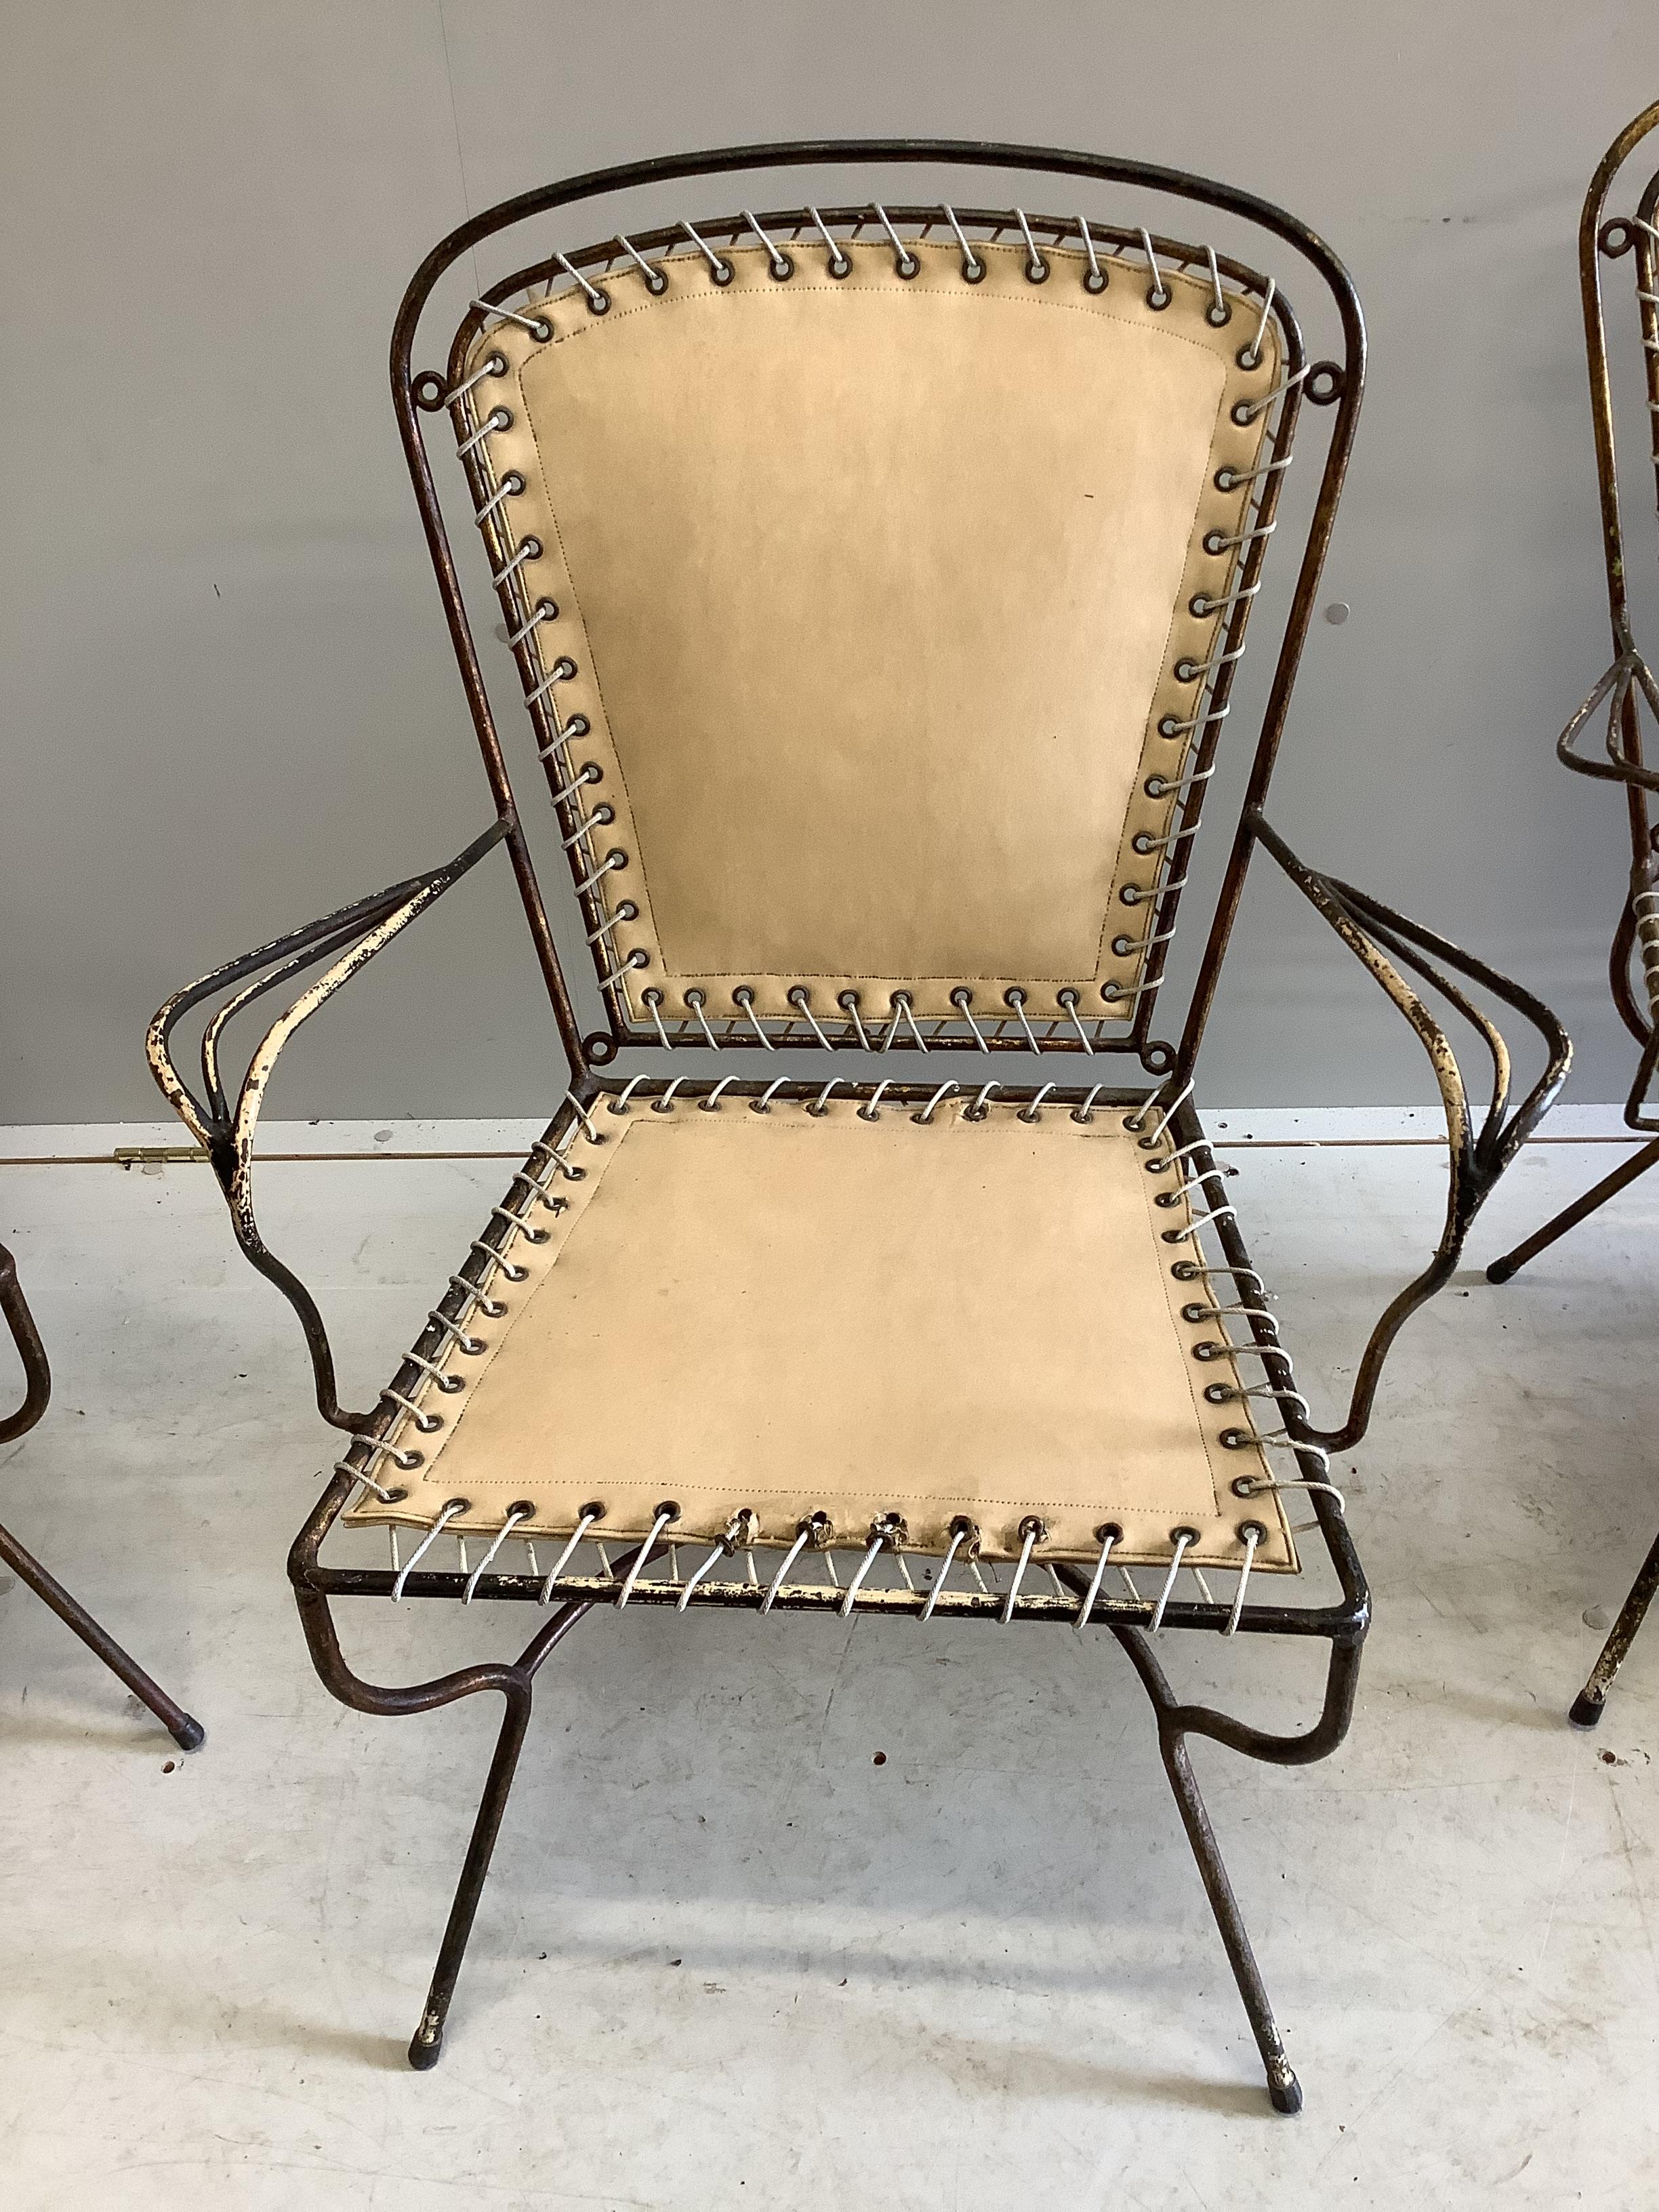 A set of four mid century wrought iron chairs, width 60cm, depth 50cm, height 84cm